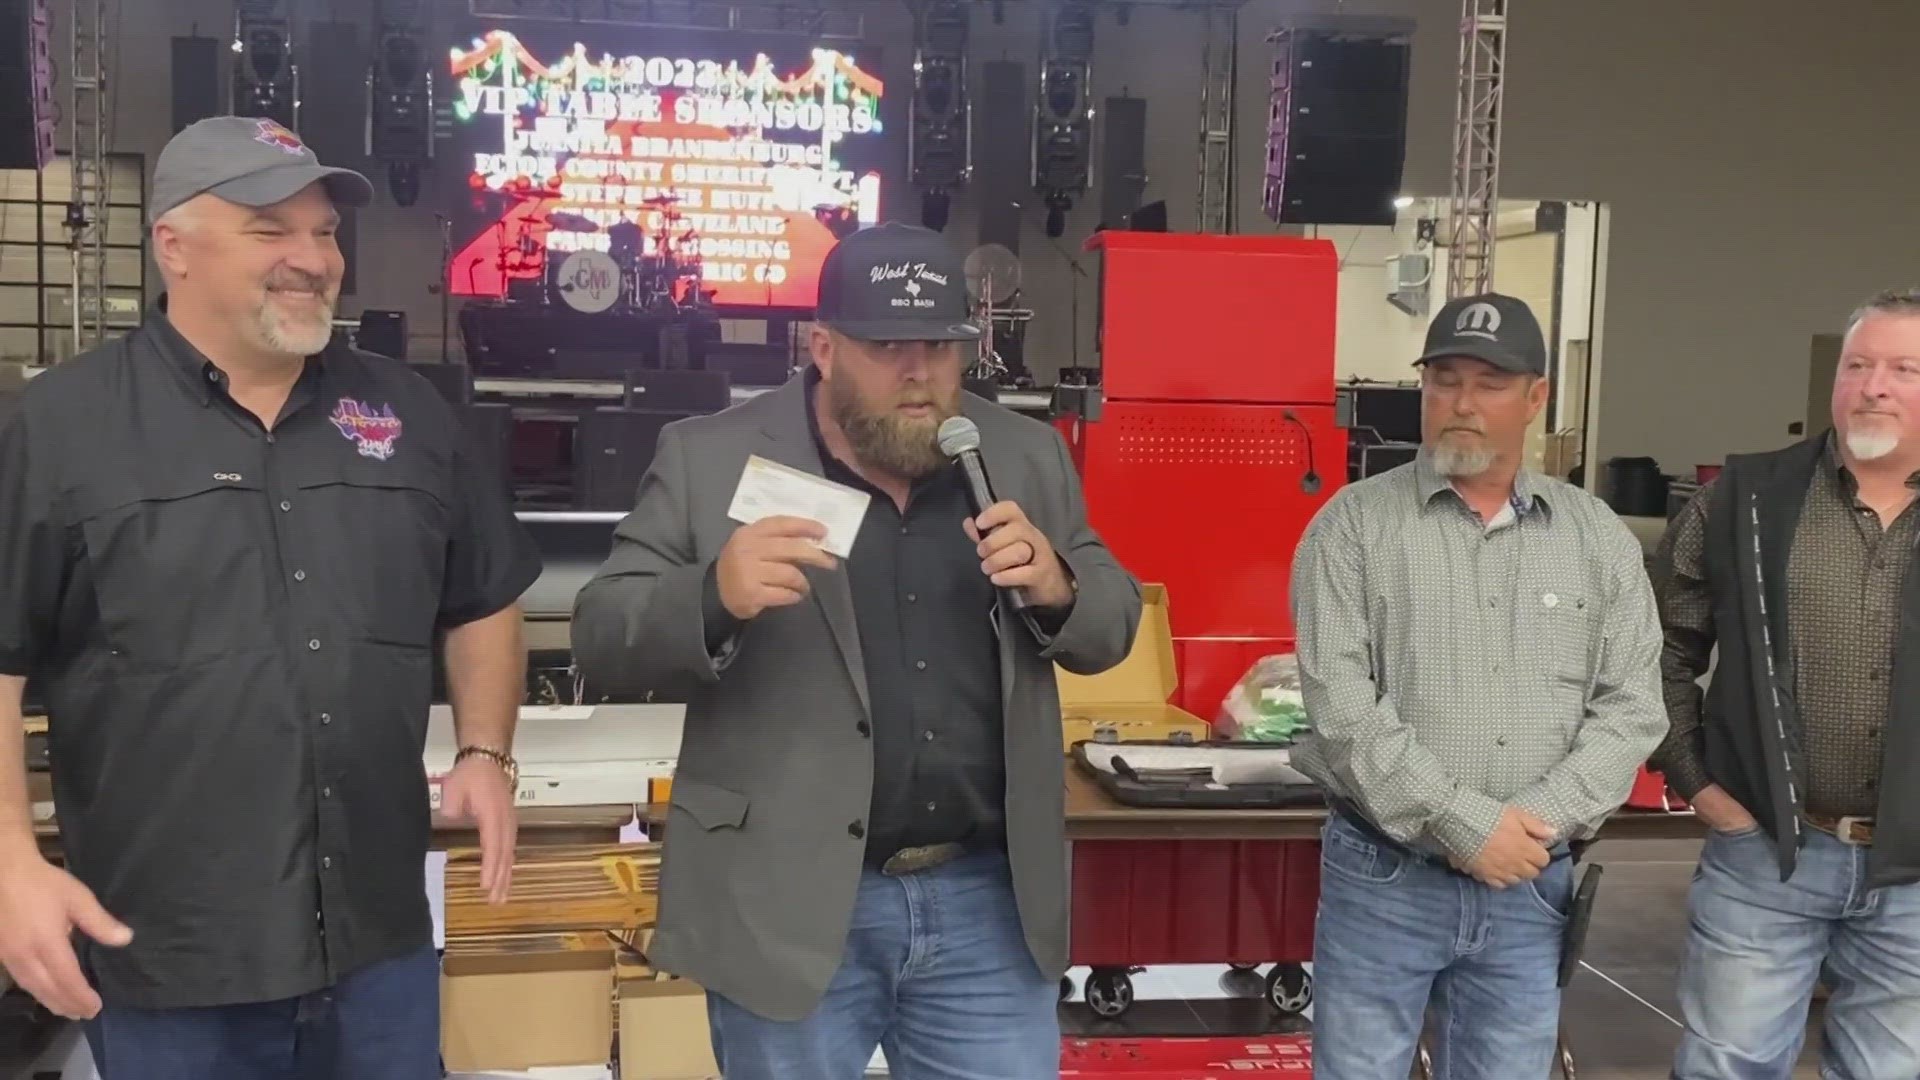 The 7th Annual Hogg Ranch Christmas Party and Toys For Tots Fundraiser was held in Monahans Saturday night. One fundraiser and department were given $25,000 checks.